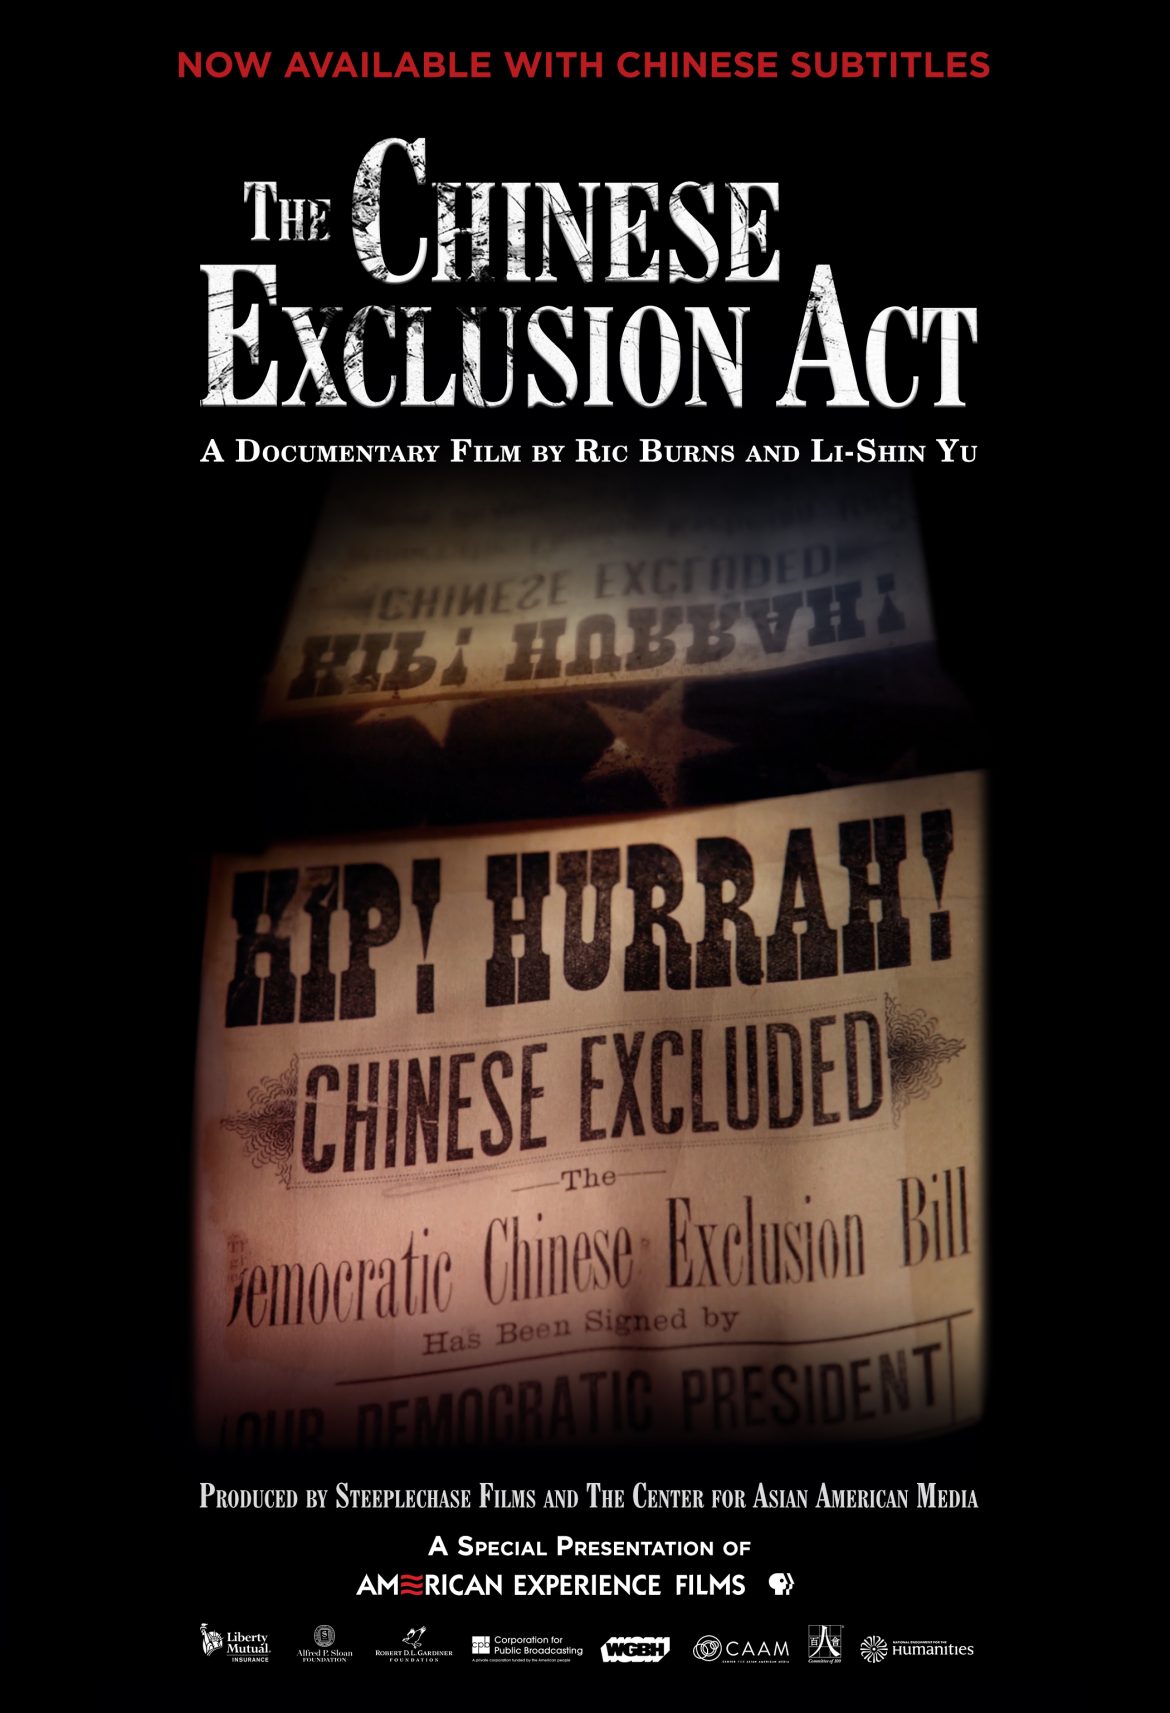 Image for "The Chinese Exclusion Act"